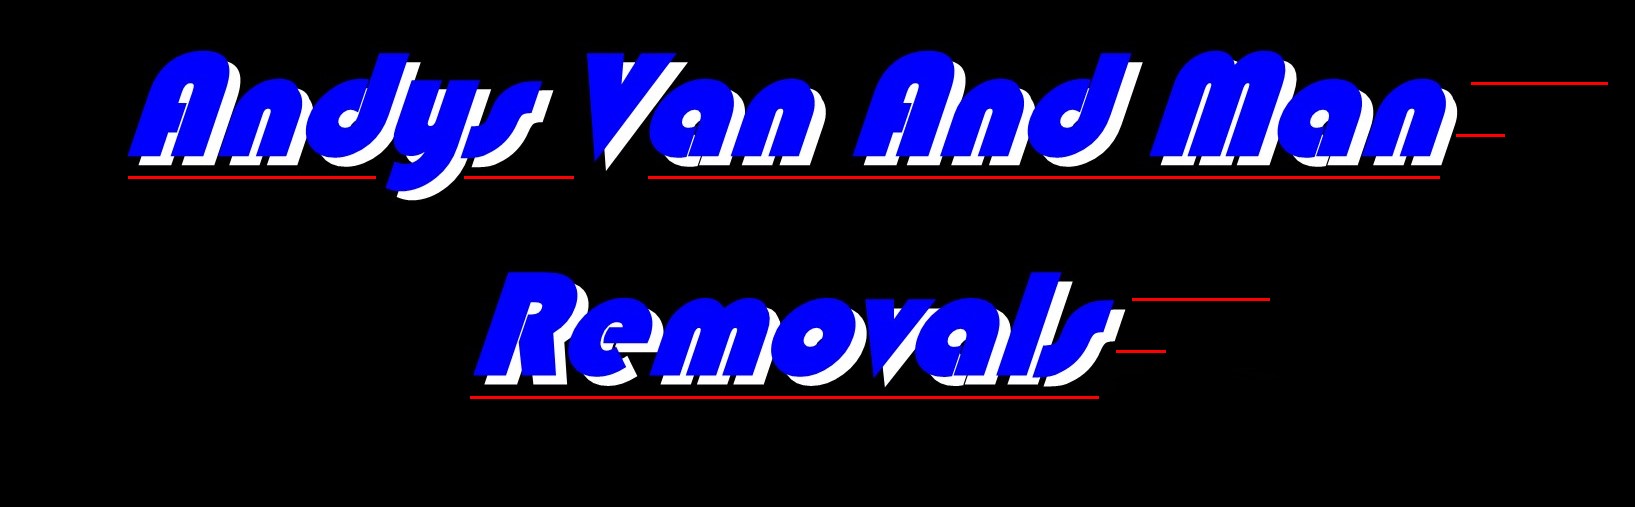 andys van and man removals, contact us